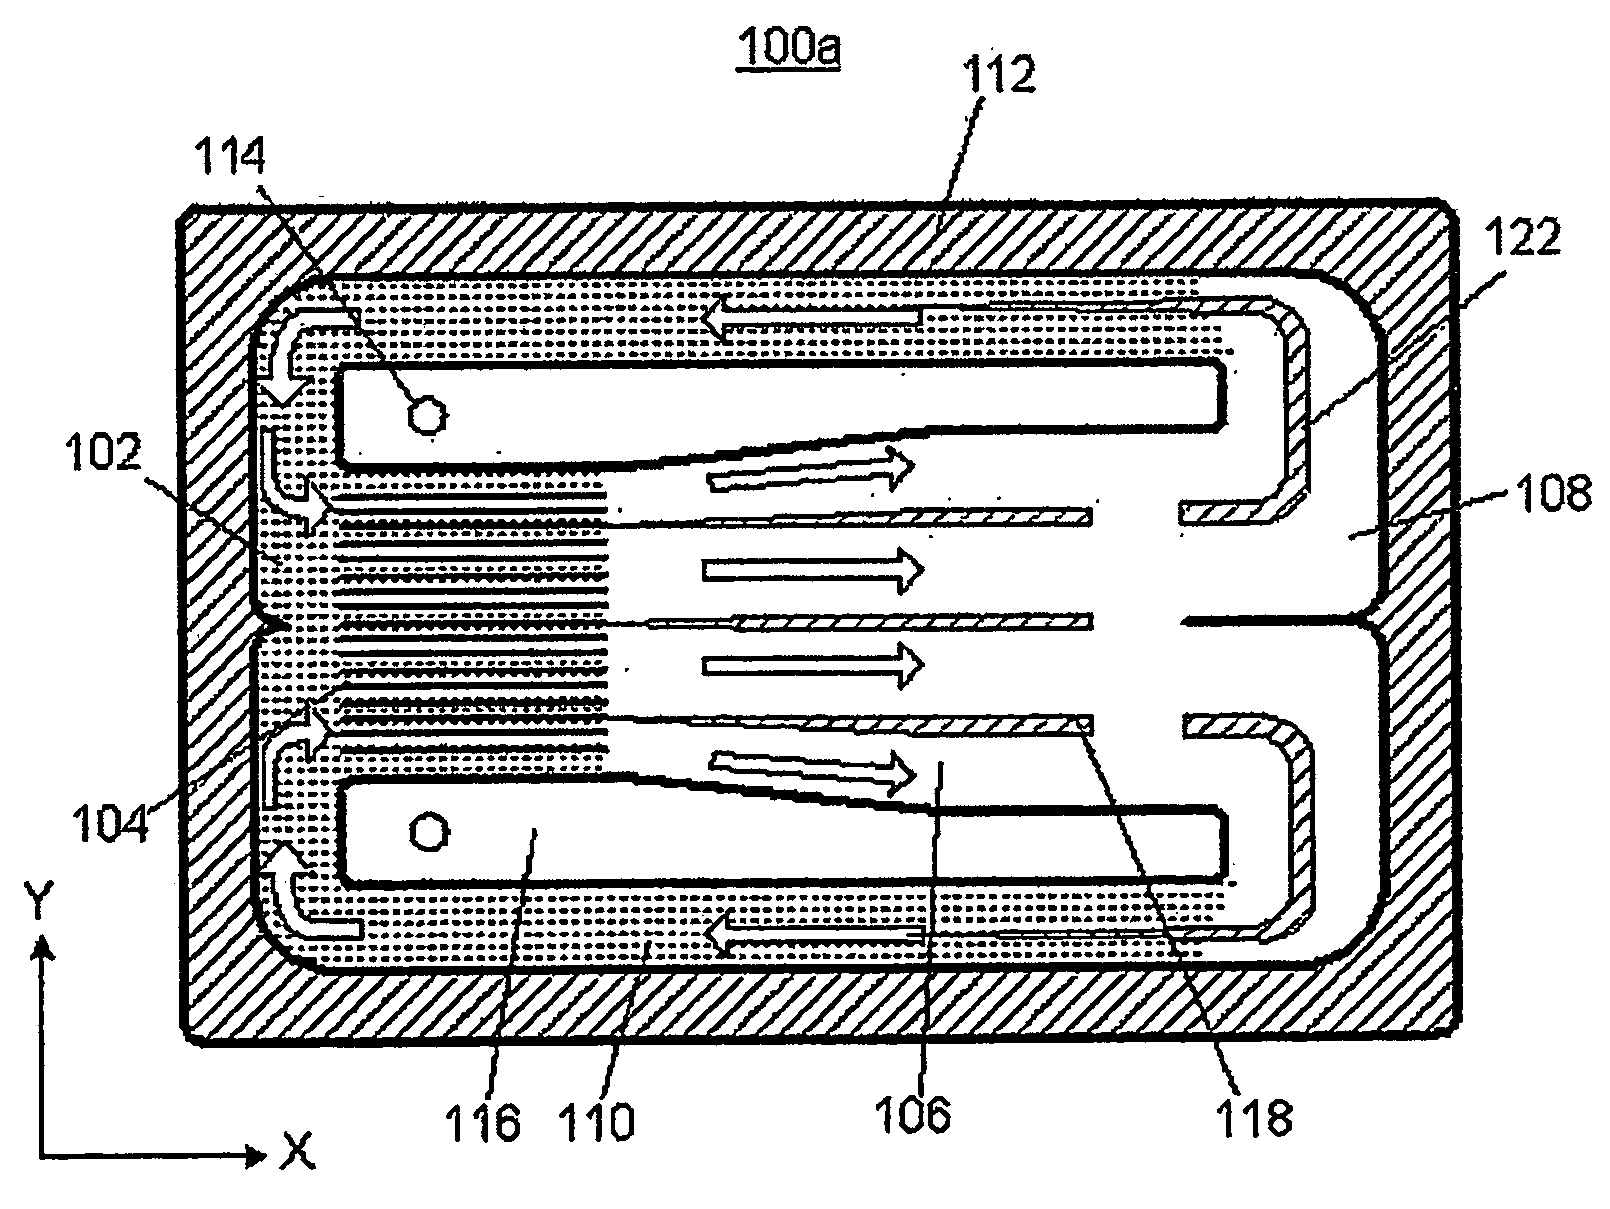 Cooling device of thin plate type for preventing dry-out